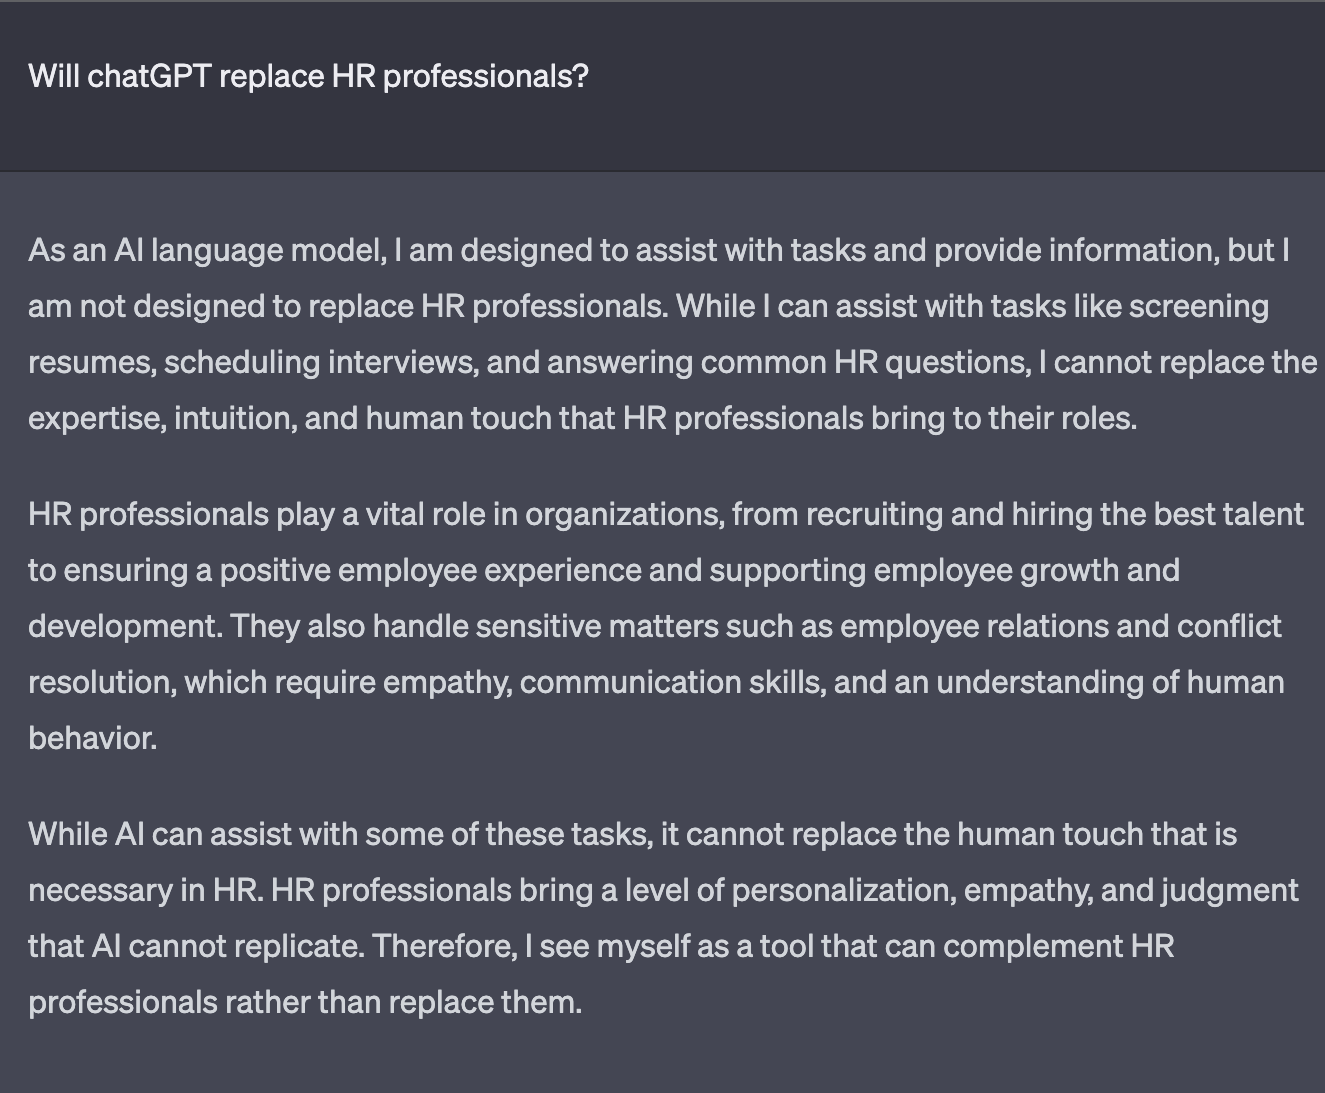 chatgpt comments on whether or not it will replace humans in hr